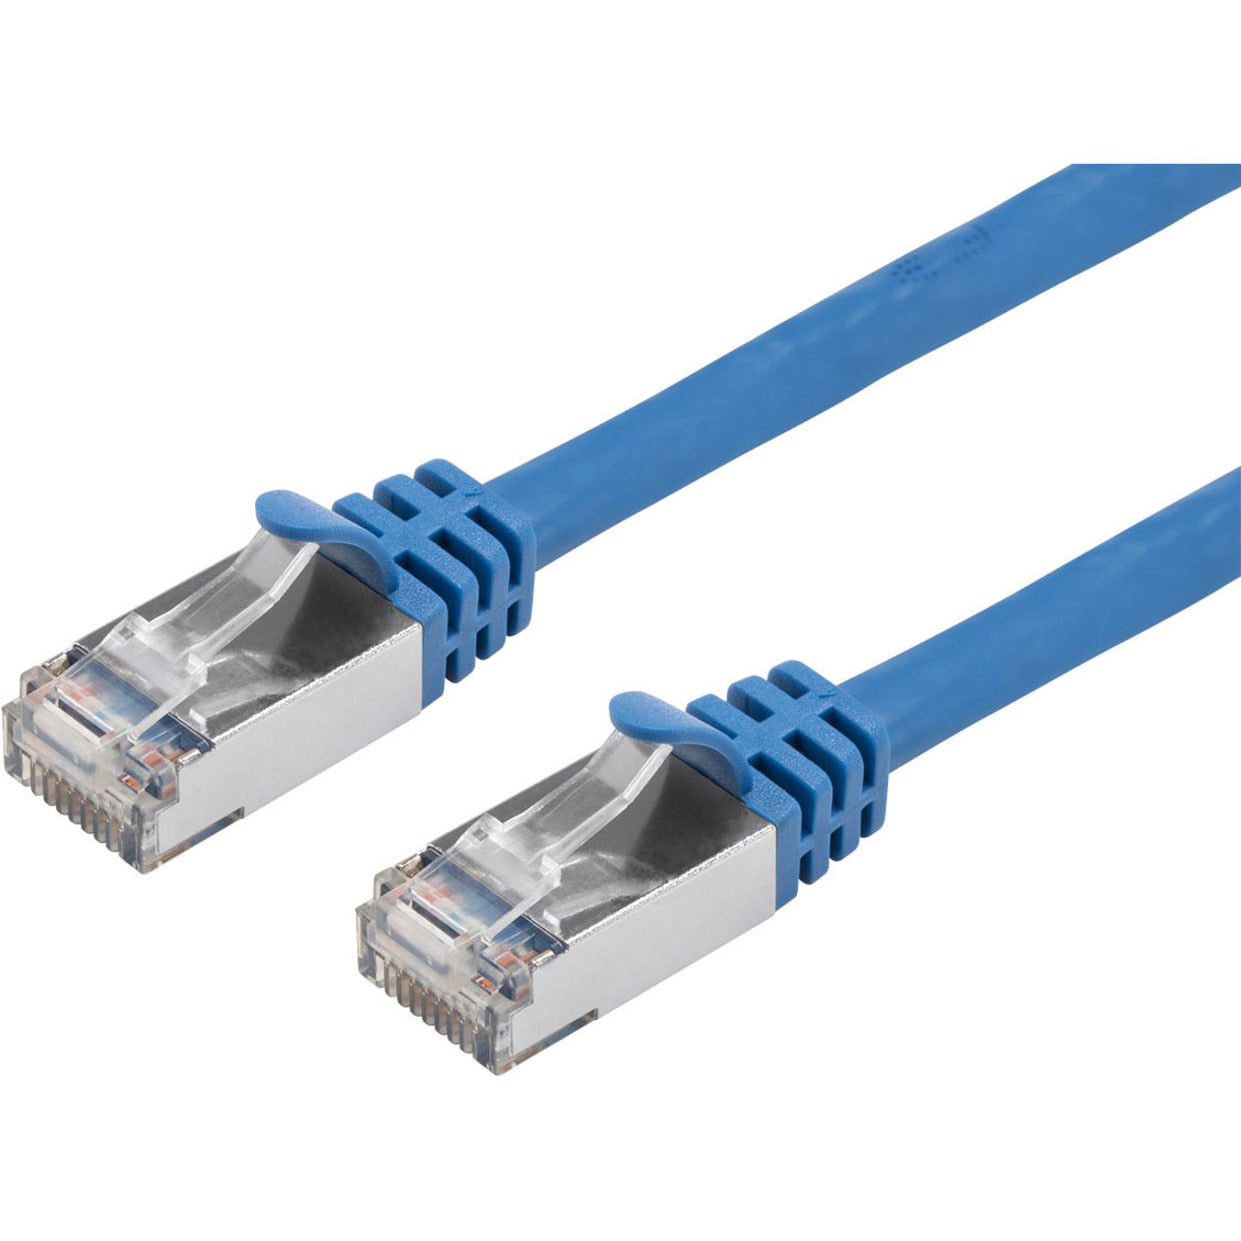 Monoprice 13661 Entegrade Cat.7 S/FTP Network Cable, 10 ft, Snagless Boot, 10 Gbit/s Data Transfer Rate